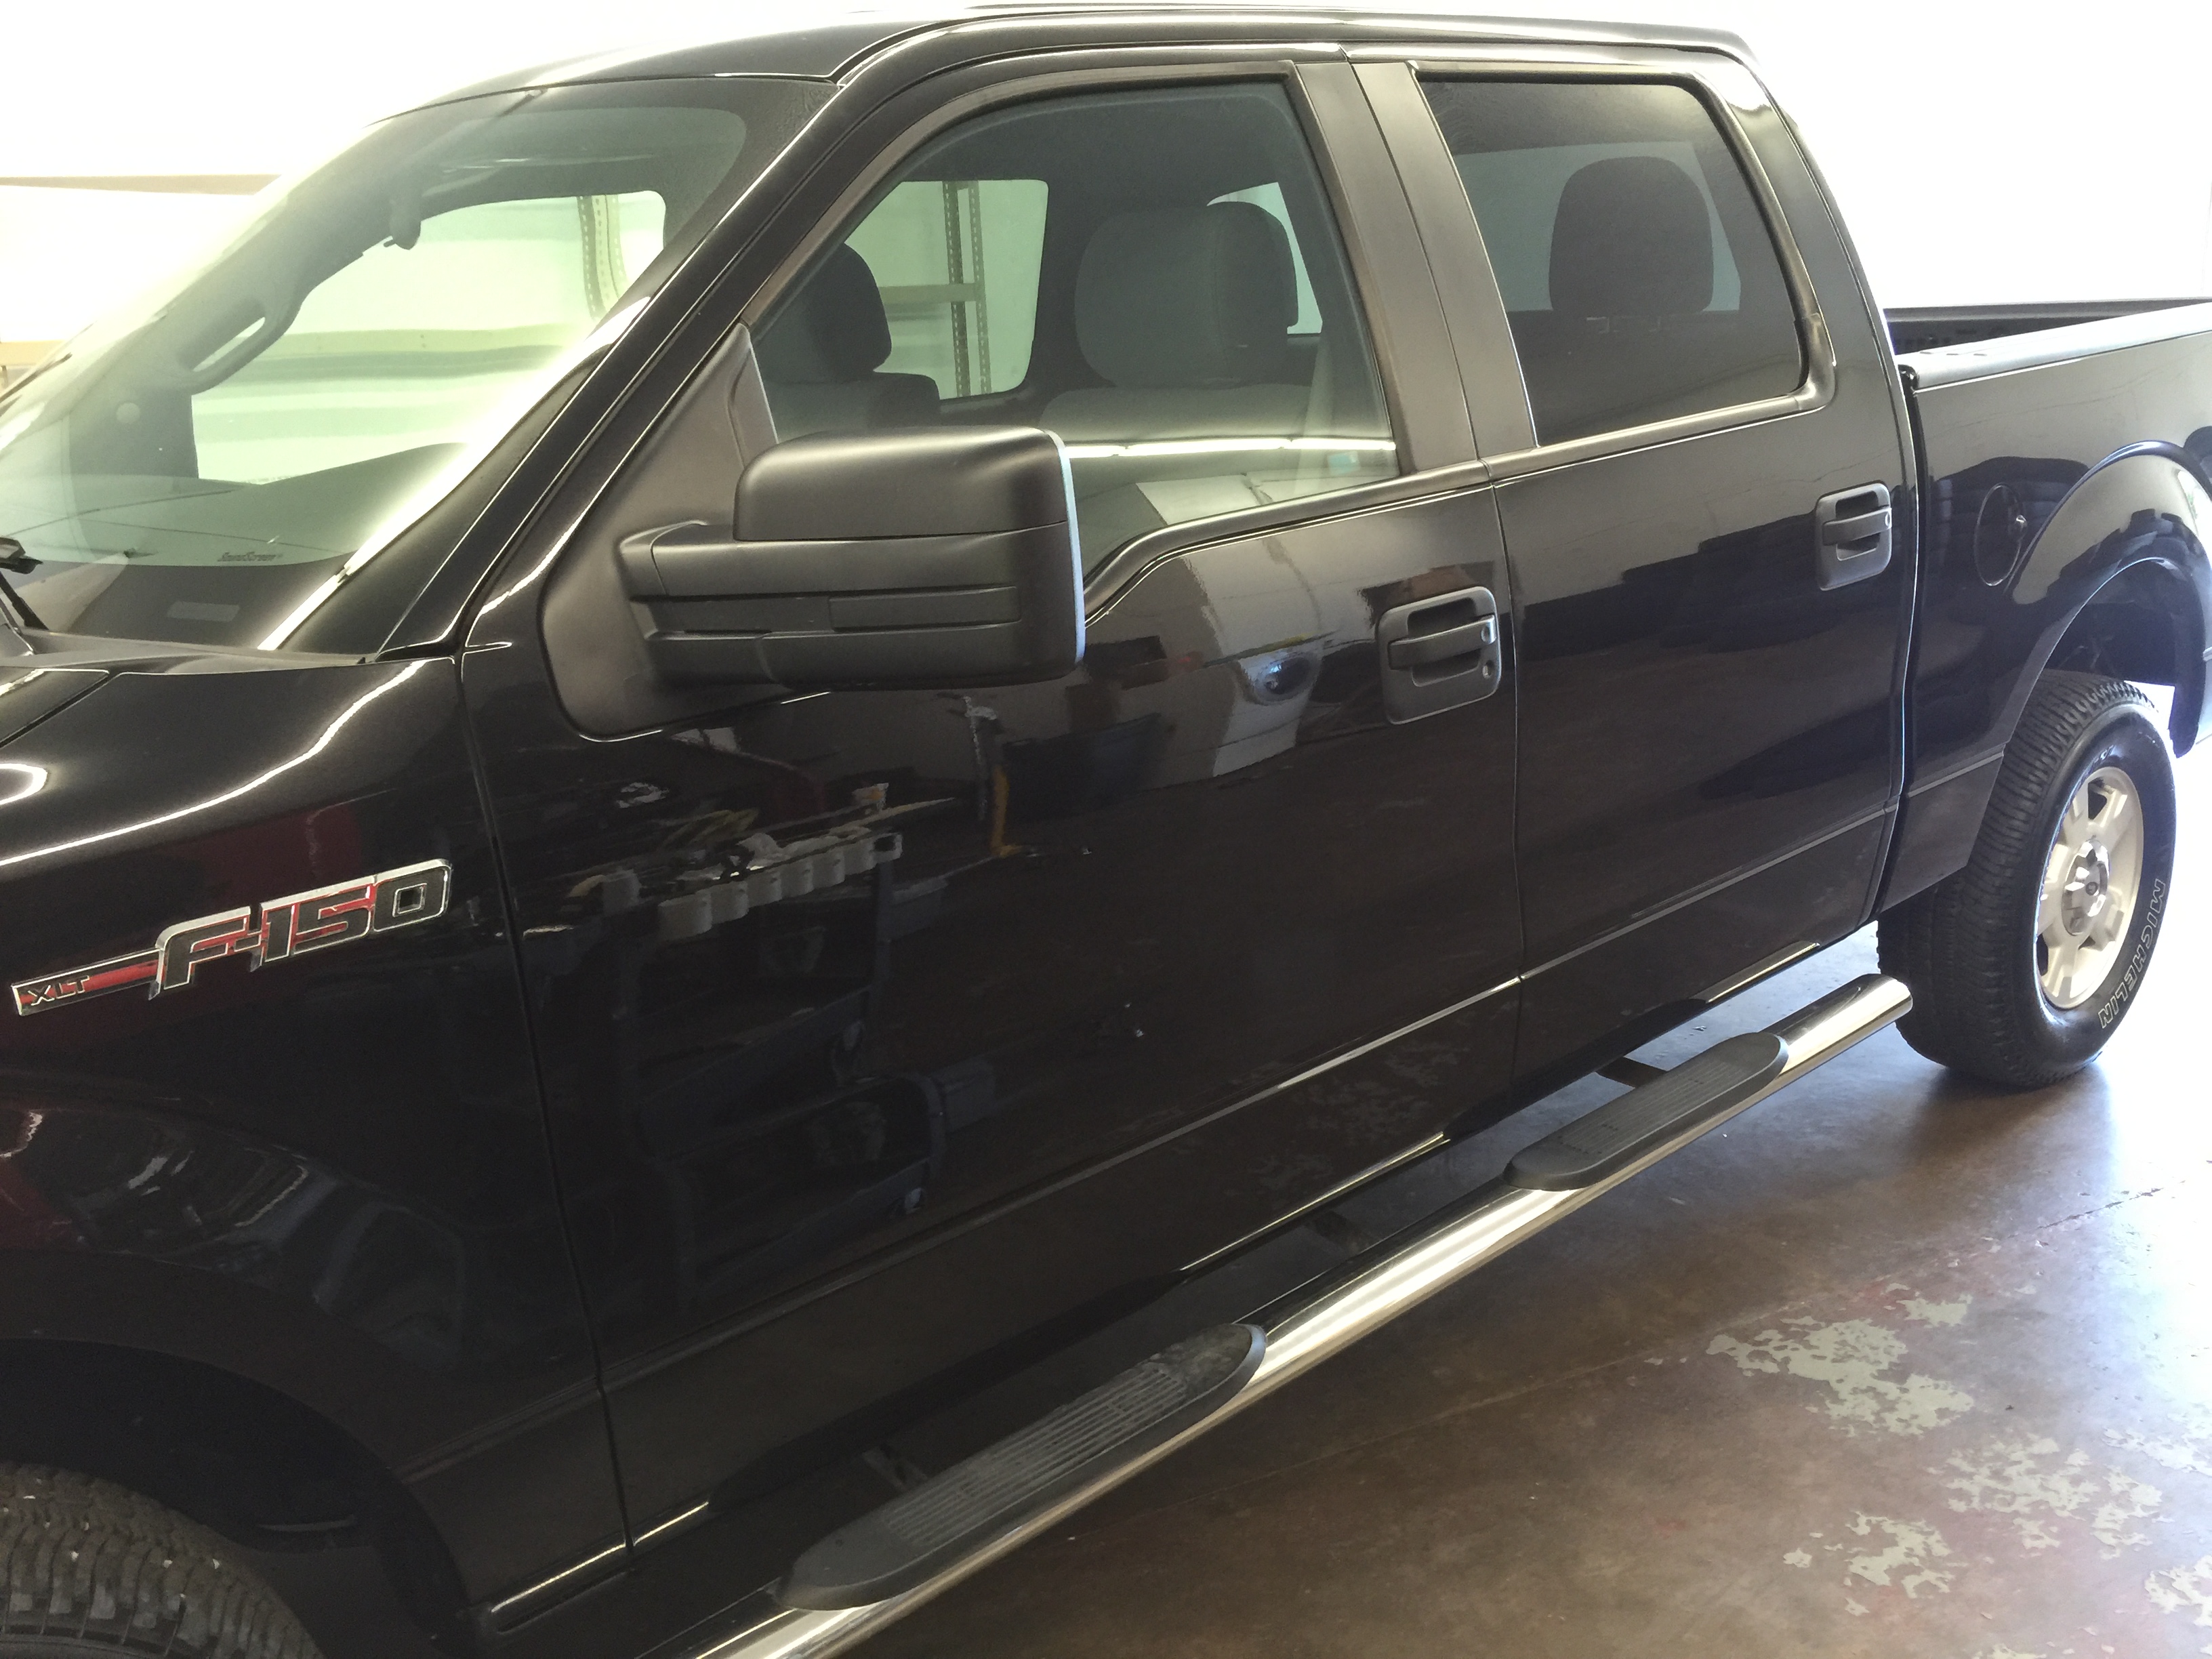 http://217dent.com 2014 Ford F-150 Dent Repair, Michael Bocek out of Springfield, IL. Drivers Side Rear Door, all glue pull dent removal. Paintless Dent Repair, Paintless Dent Removal, Taylorville, Decatur, Pana, IL